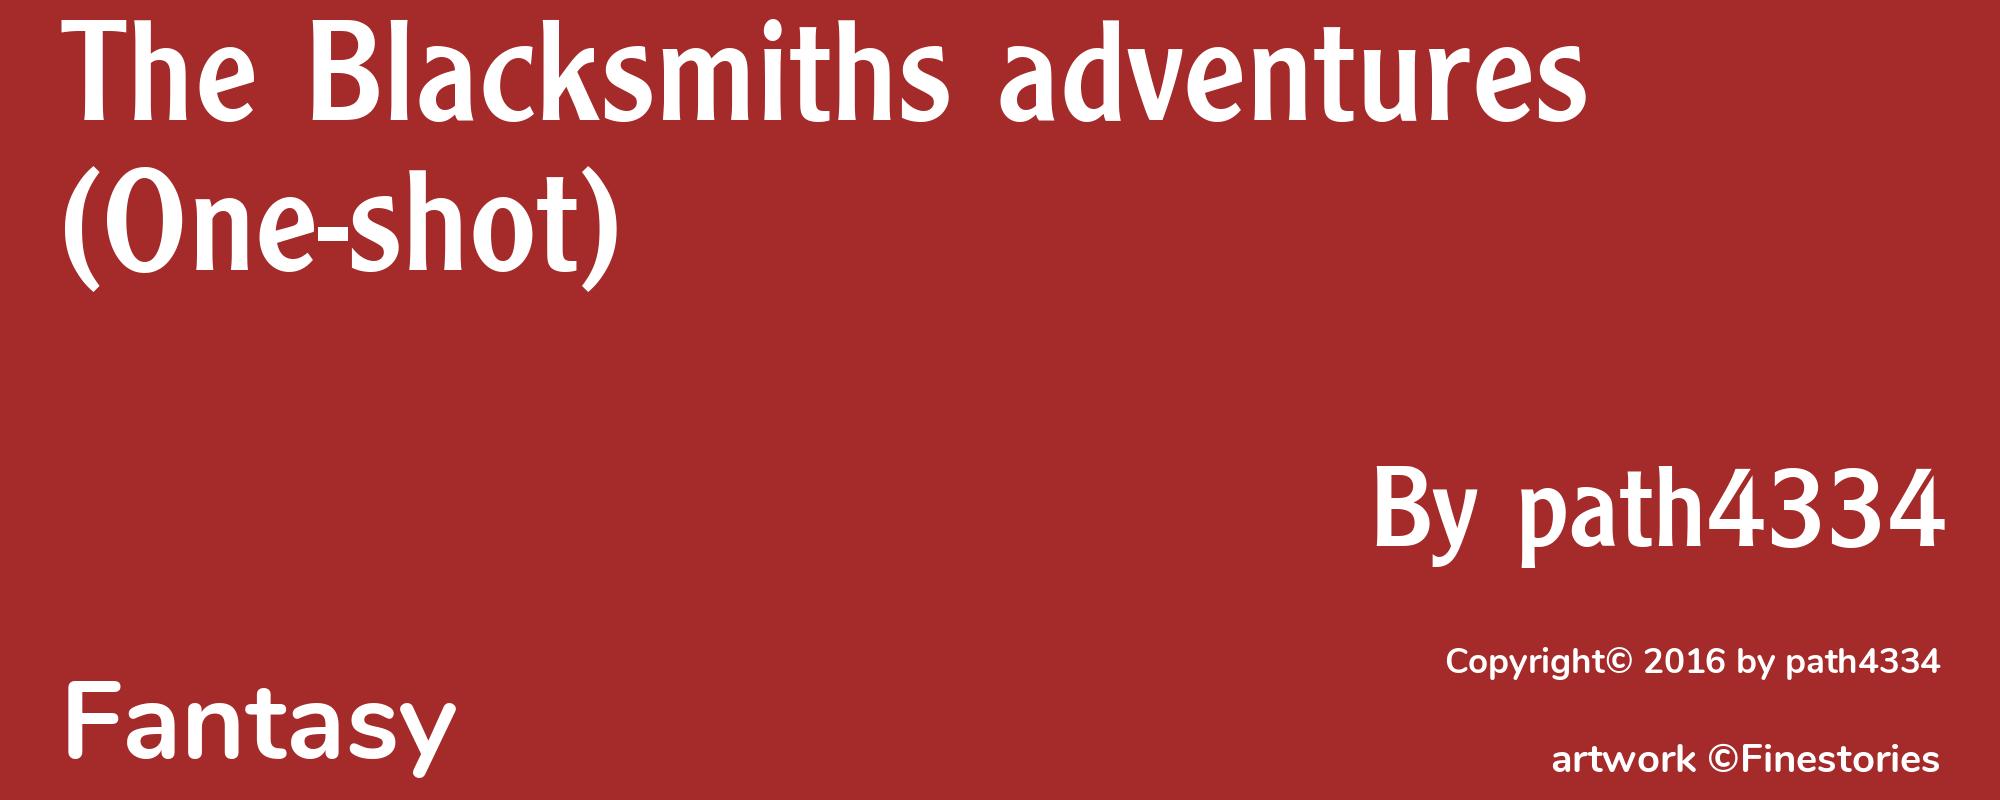 The Blacksmiths adventures (One-shot) - Cover